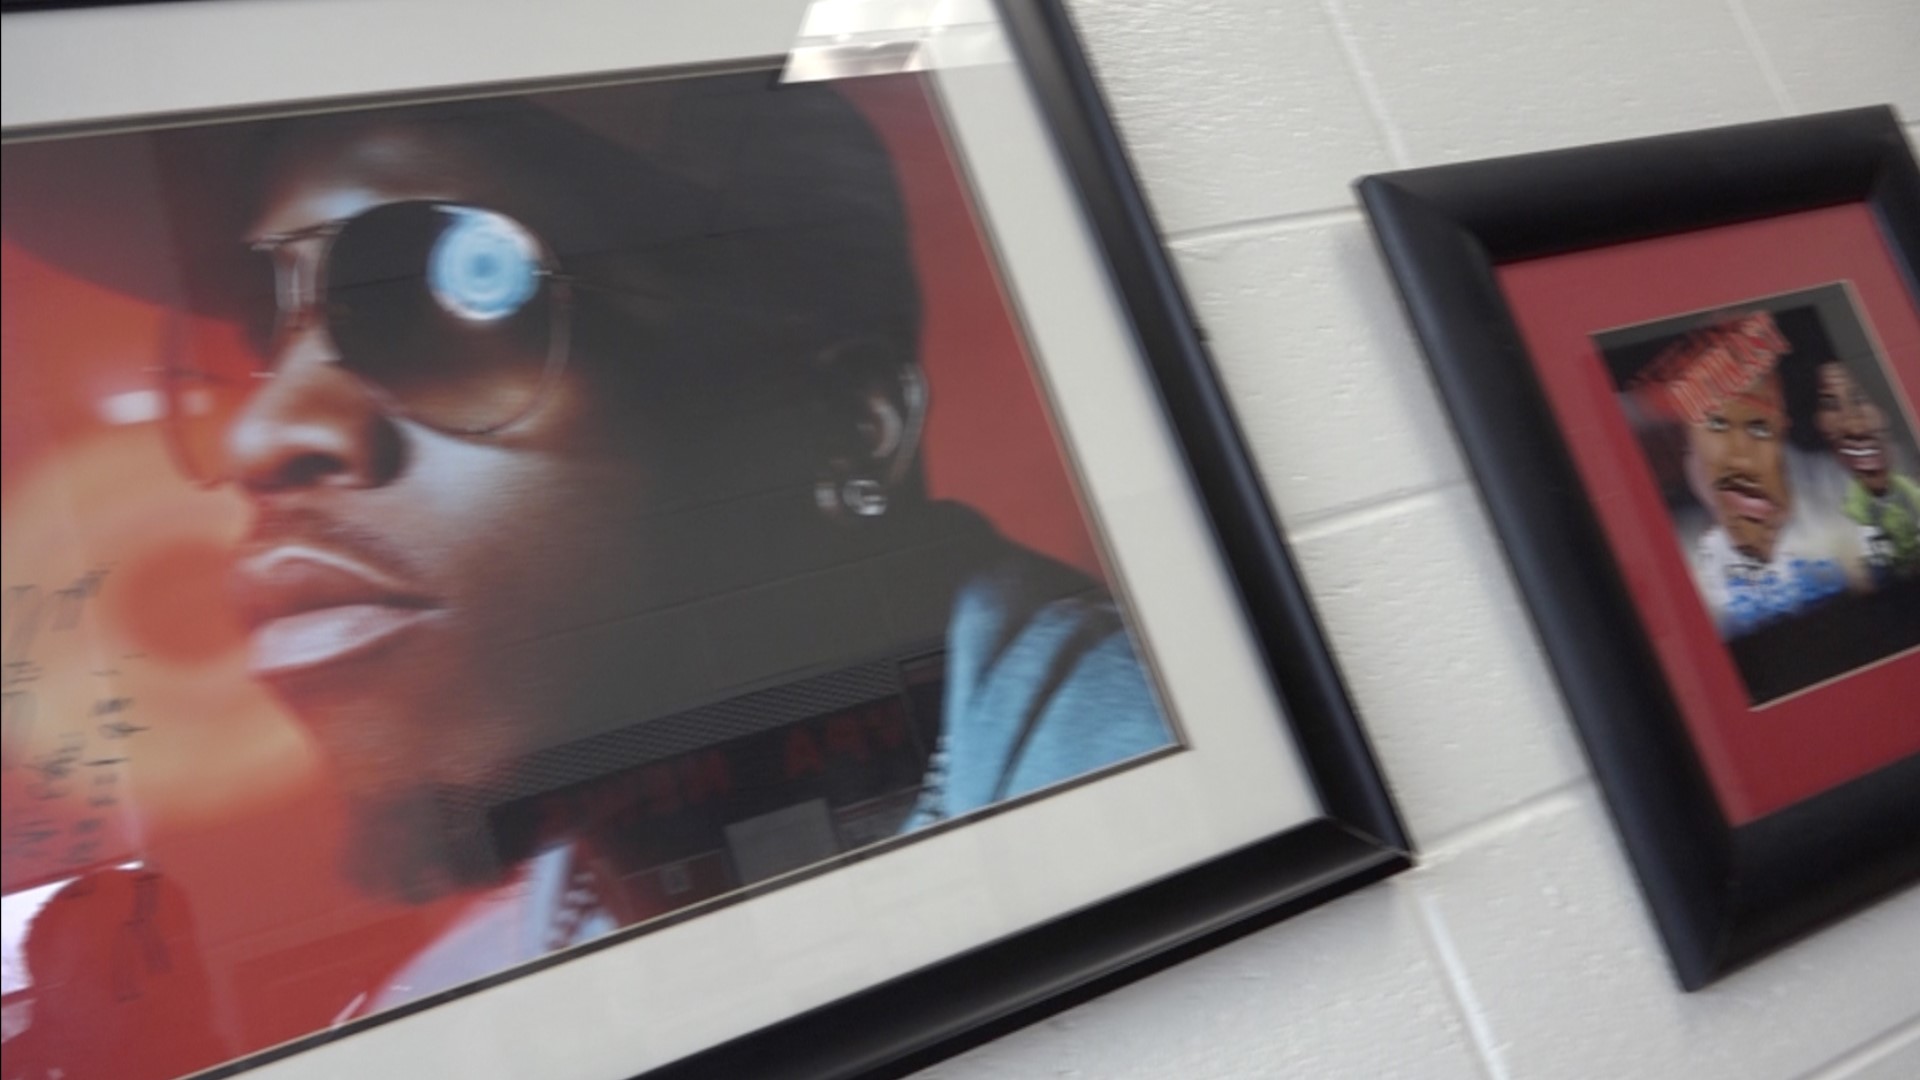 Staff and students at Tri-Cities high school reveal what Atlanta rapper "Big Boi" was like in high school.